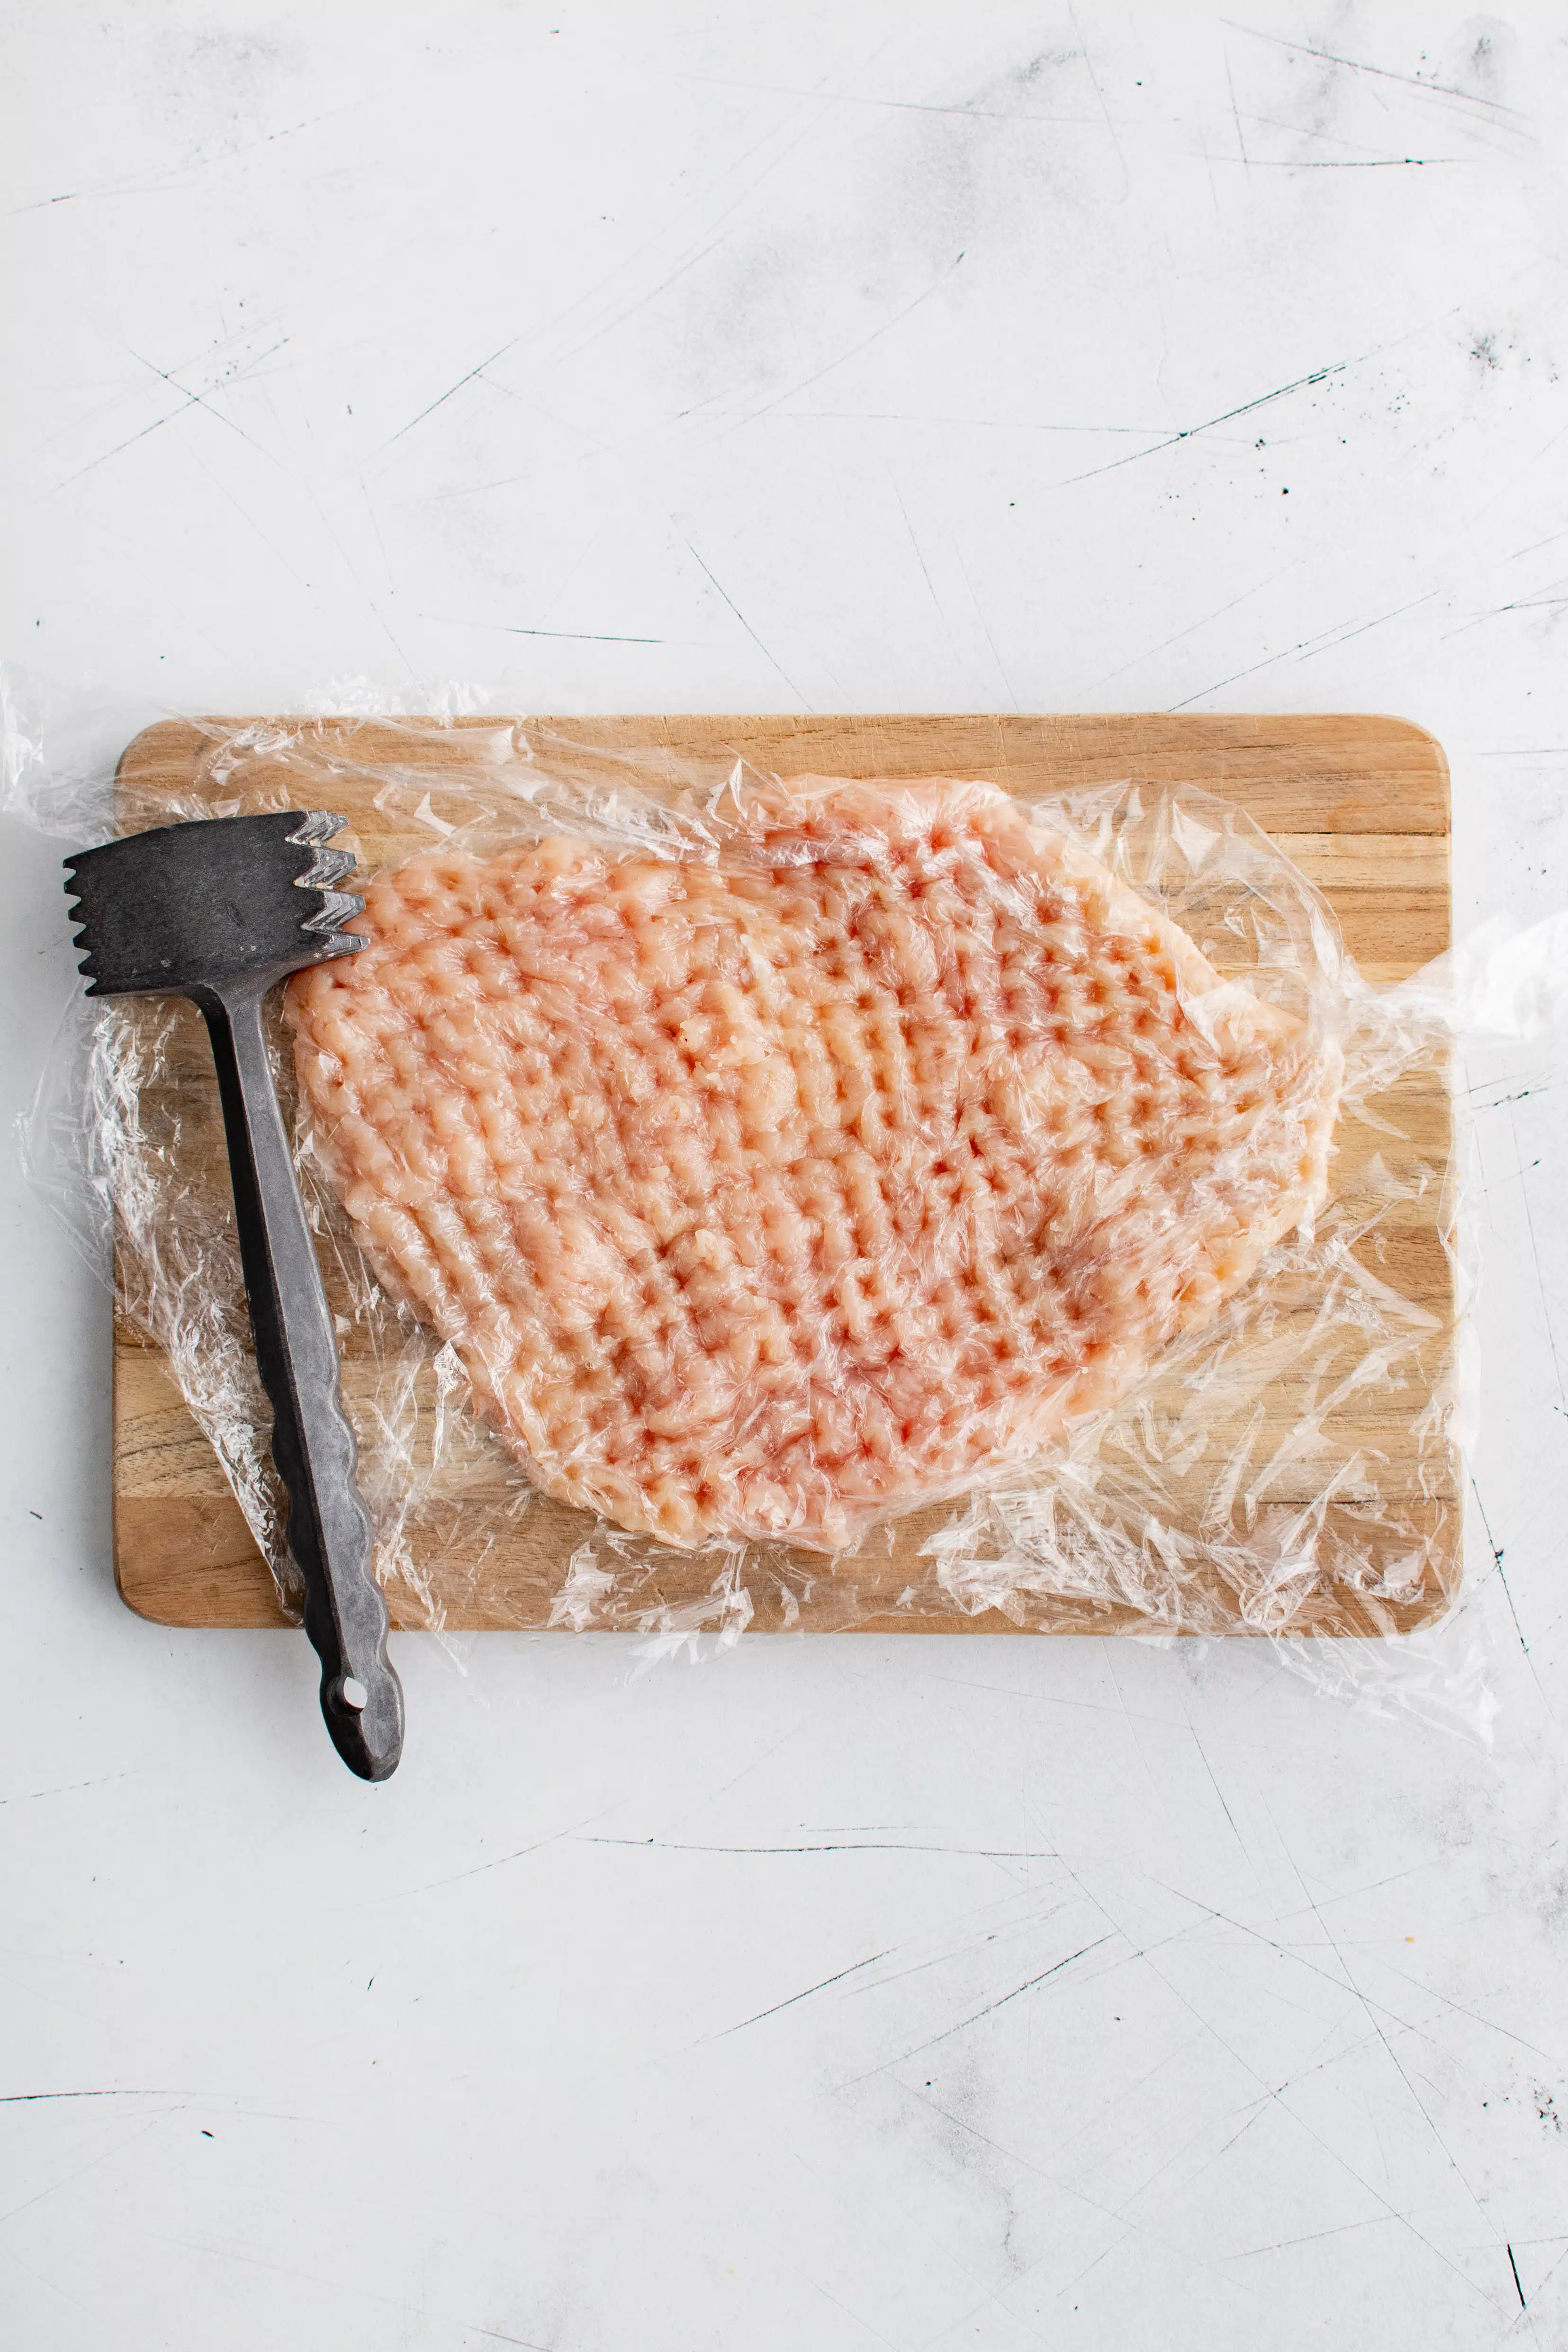 Large cutting board with a chicken breast under plastic wrap and pounded thin with a meat mallet.